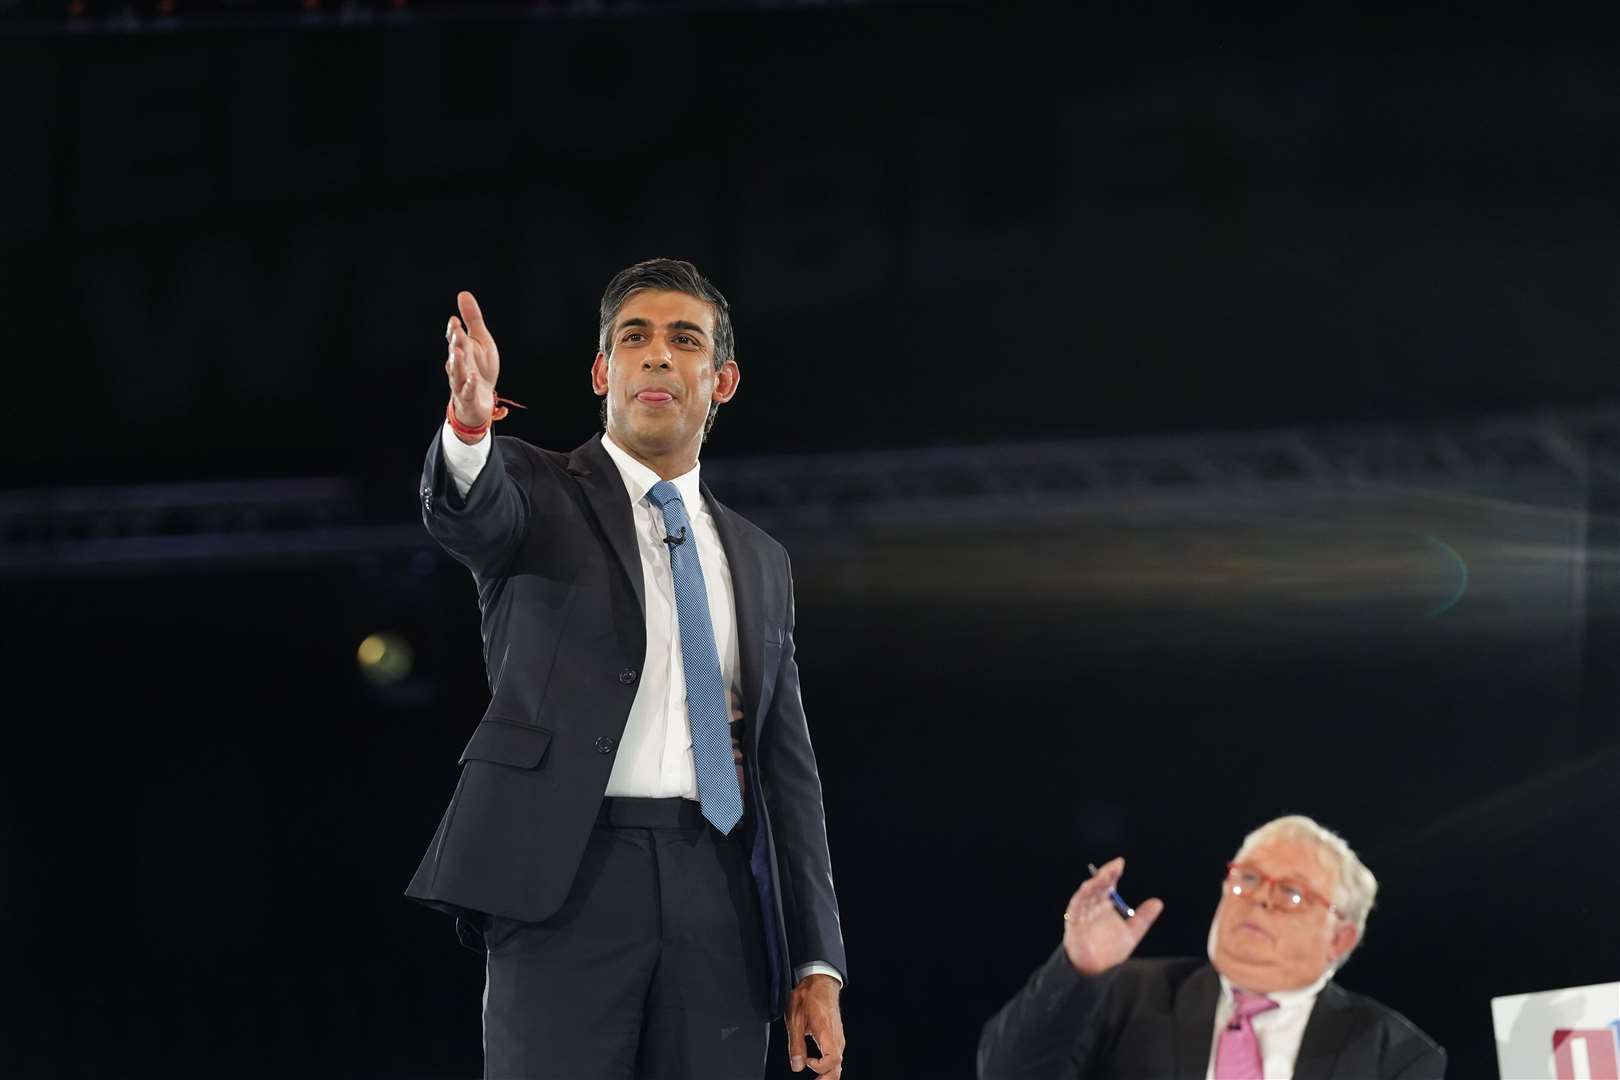 Rishi Sunak during a hustings event at Wembley Arena (Stefan Rousseau/PA)